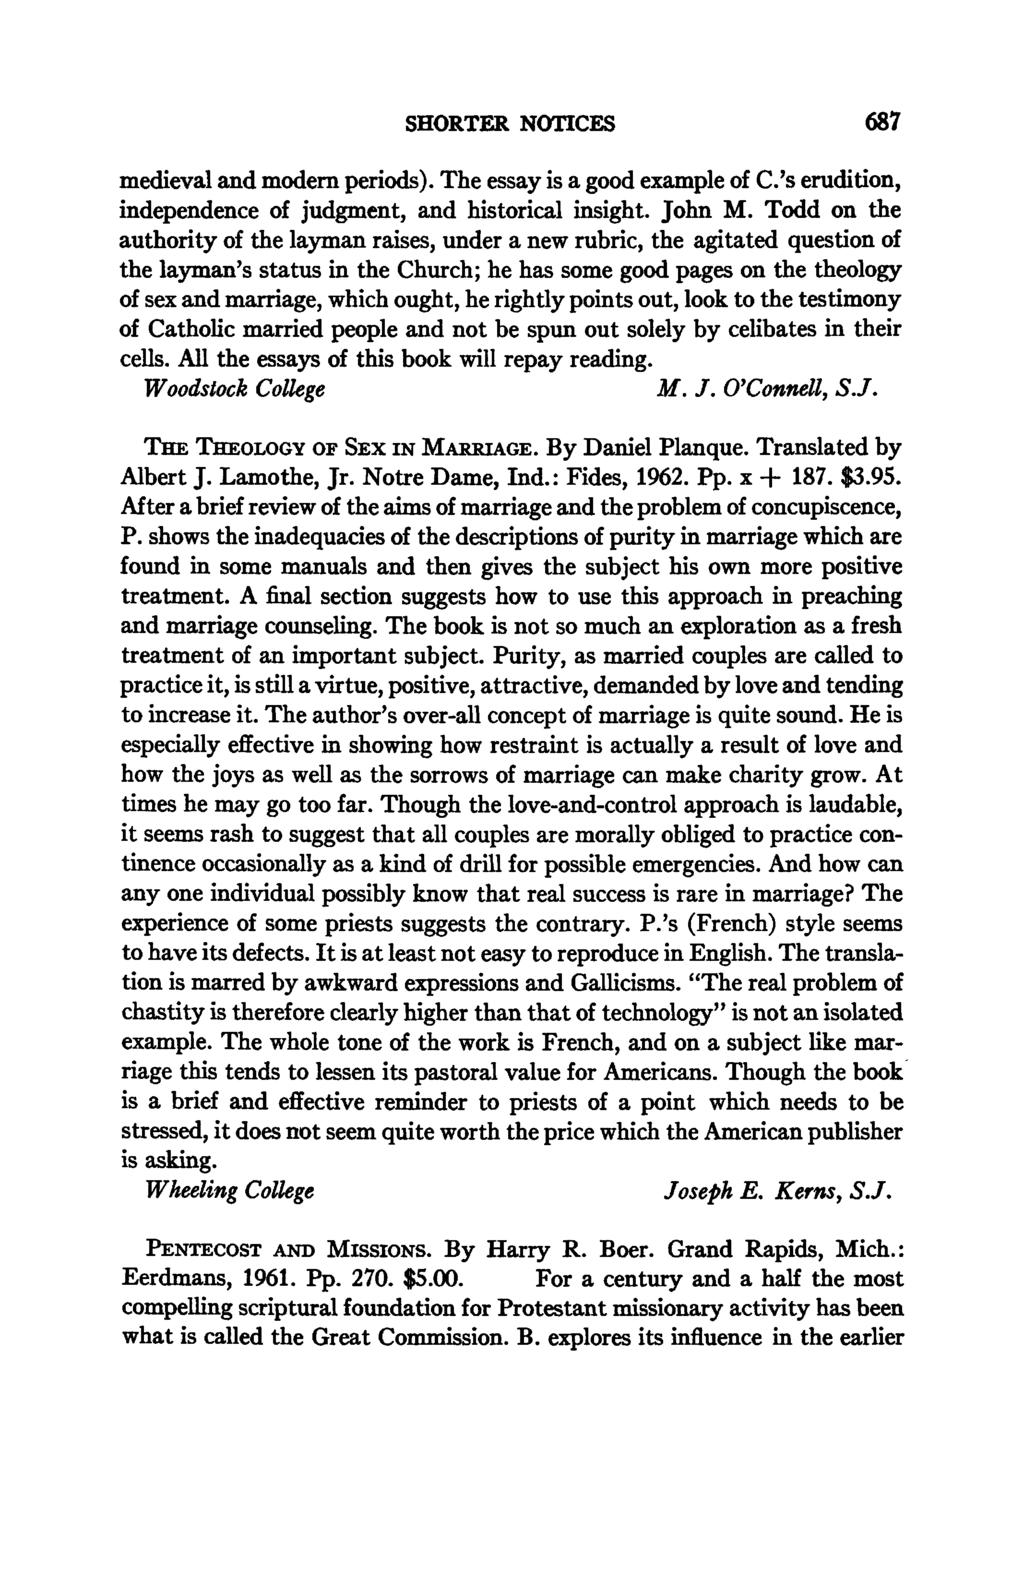 SHORTER NOTICES 687 medieval and modern periods). The essay is a good example of C.'s erudition, independence of judgment, and historical insight. John M.